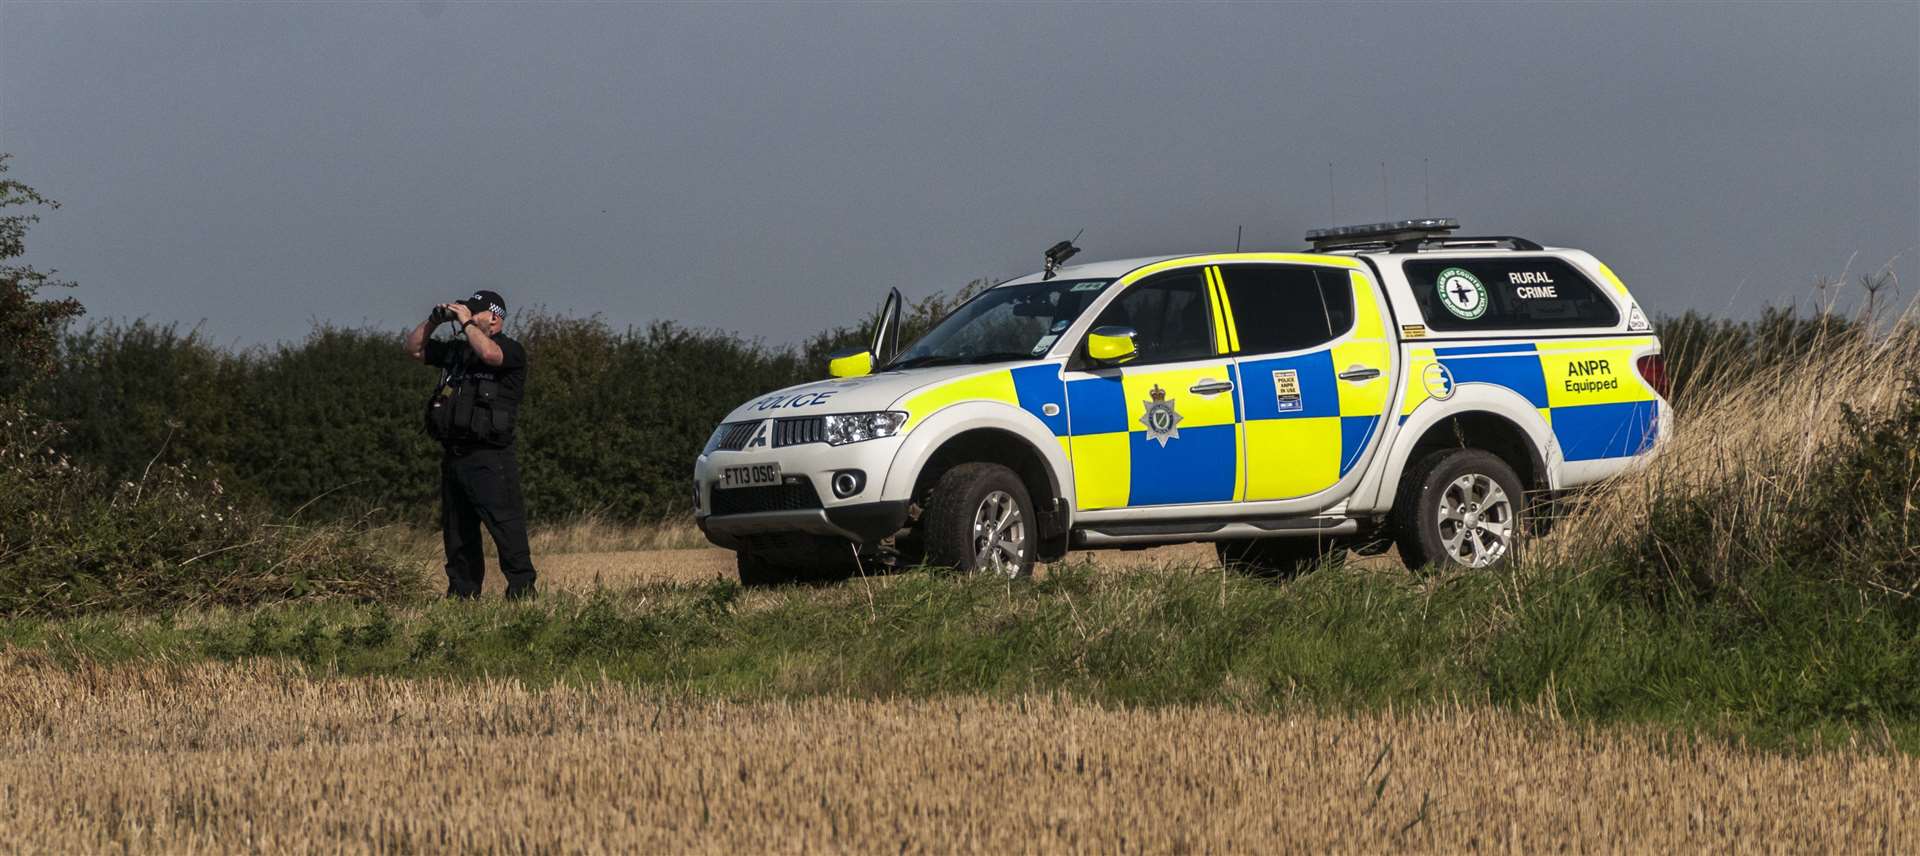 Crimestoppers received 2,700 anonymous reports about rural crime last year